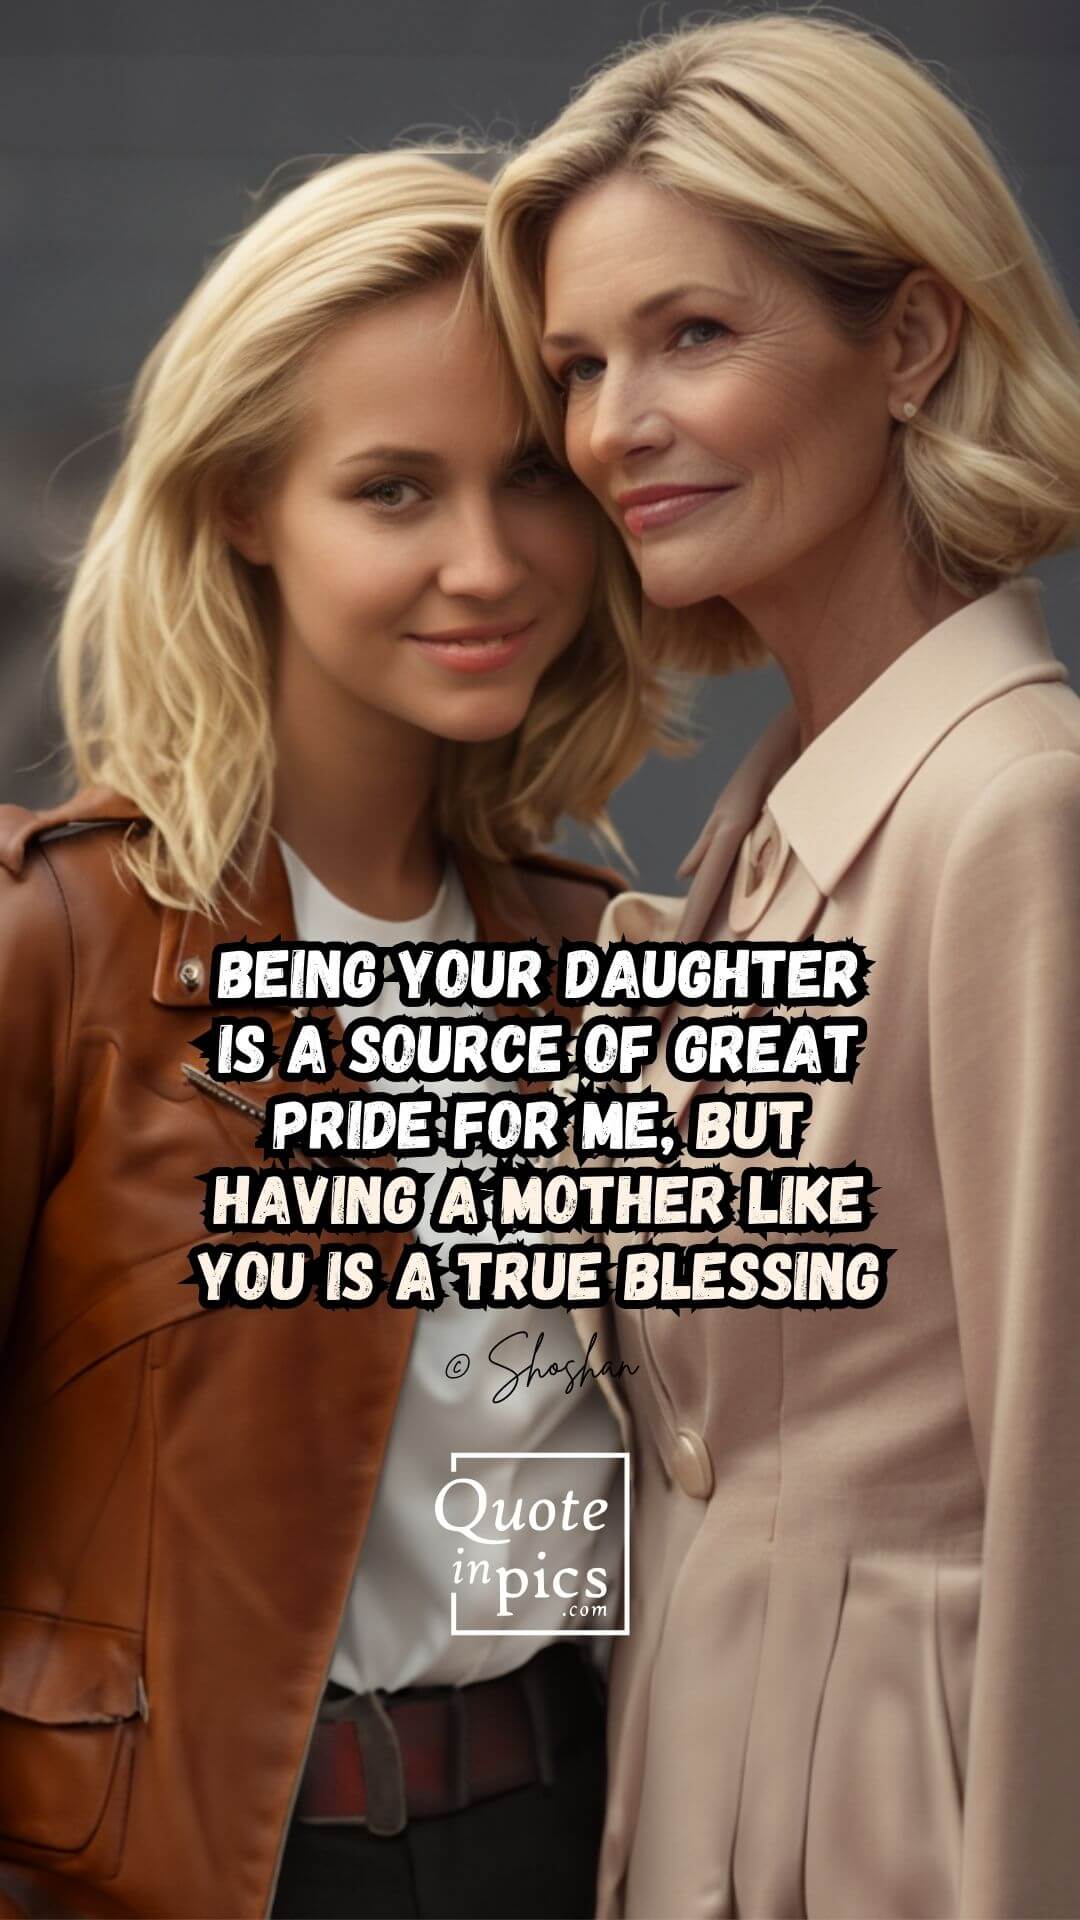 Being your daughter is a source of great pride for me, but having a mother like you is a true blessing